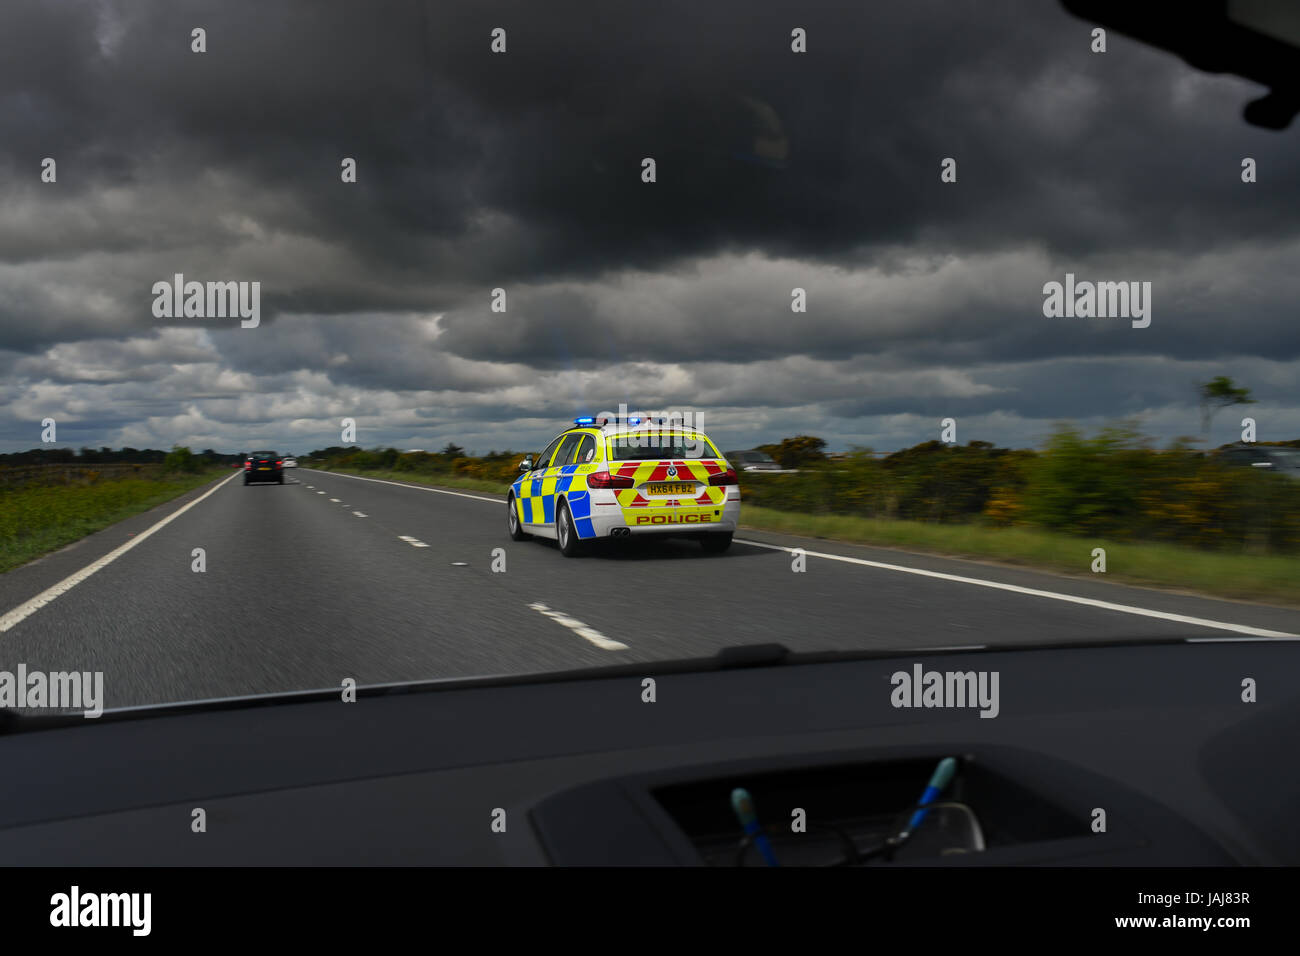 A BMW Police car speeds along a duel carriageway on a call to an emergency with lights ablaze viewed from inside a car Stock Photo